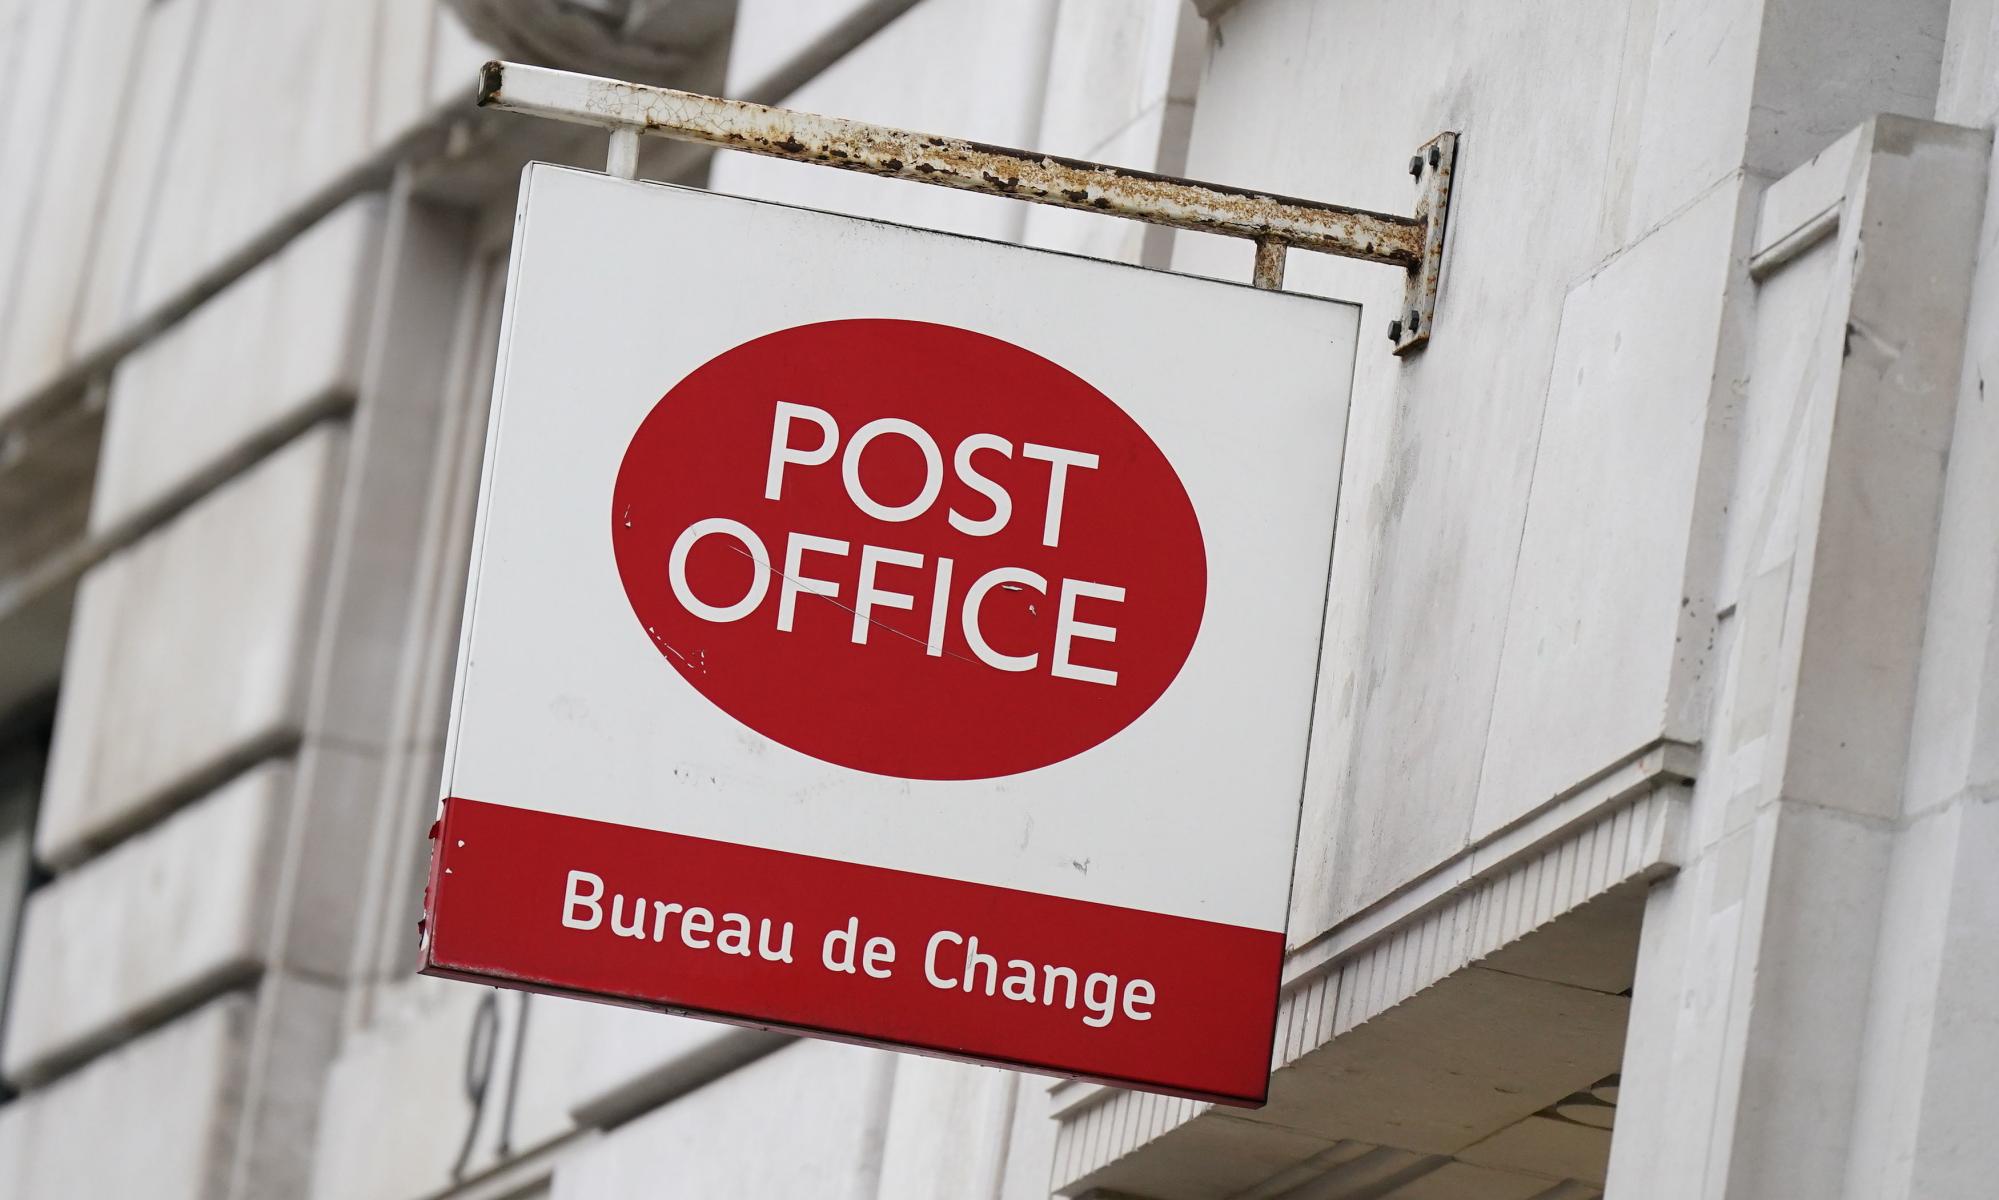 post office lawyers said leaving no stone unturned was unrealistic, inquiry told